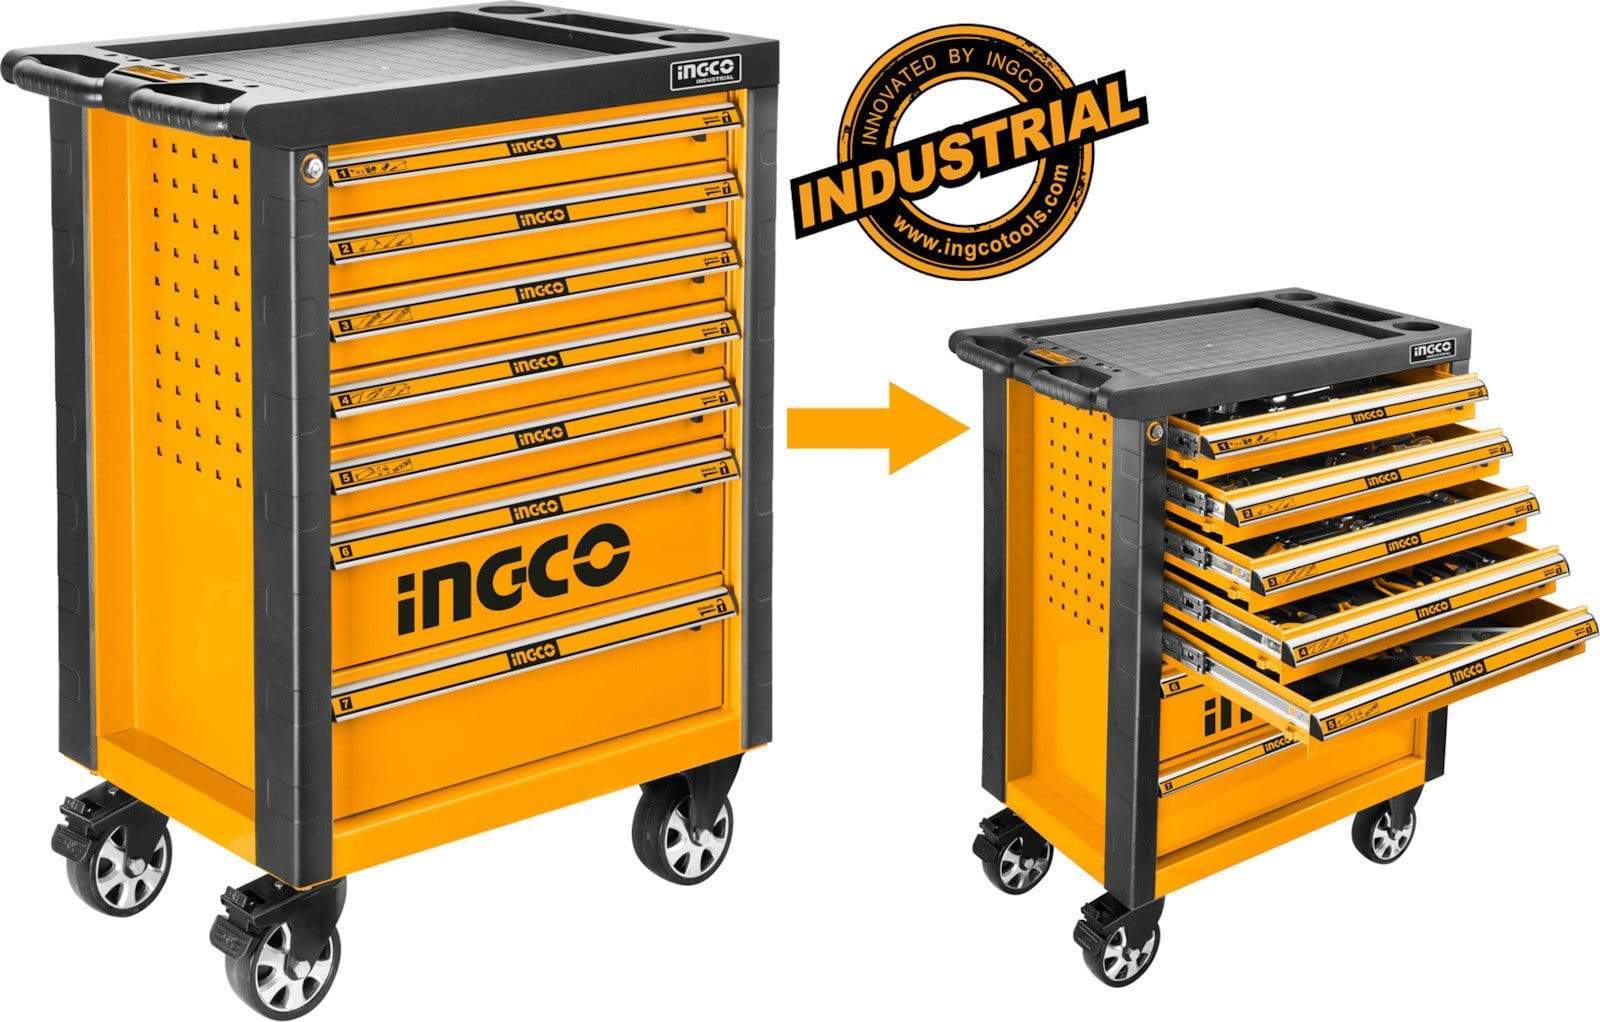 Ingco 162 Pieces Tool Chest Set - HTCS271621 | Supply Master | Accra, Ghana Tools Building Steel Engineering Hardware tool